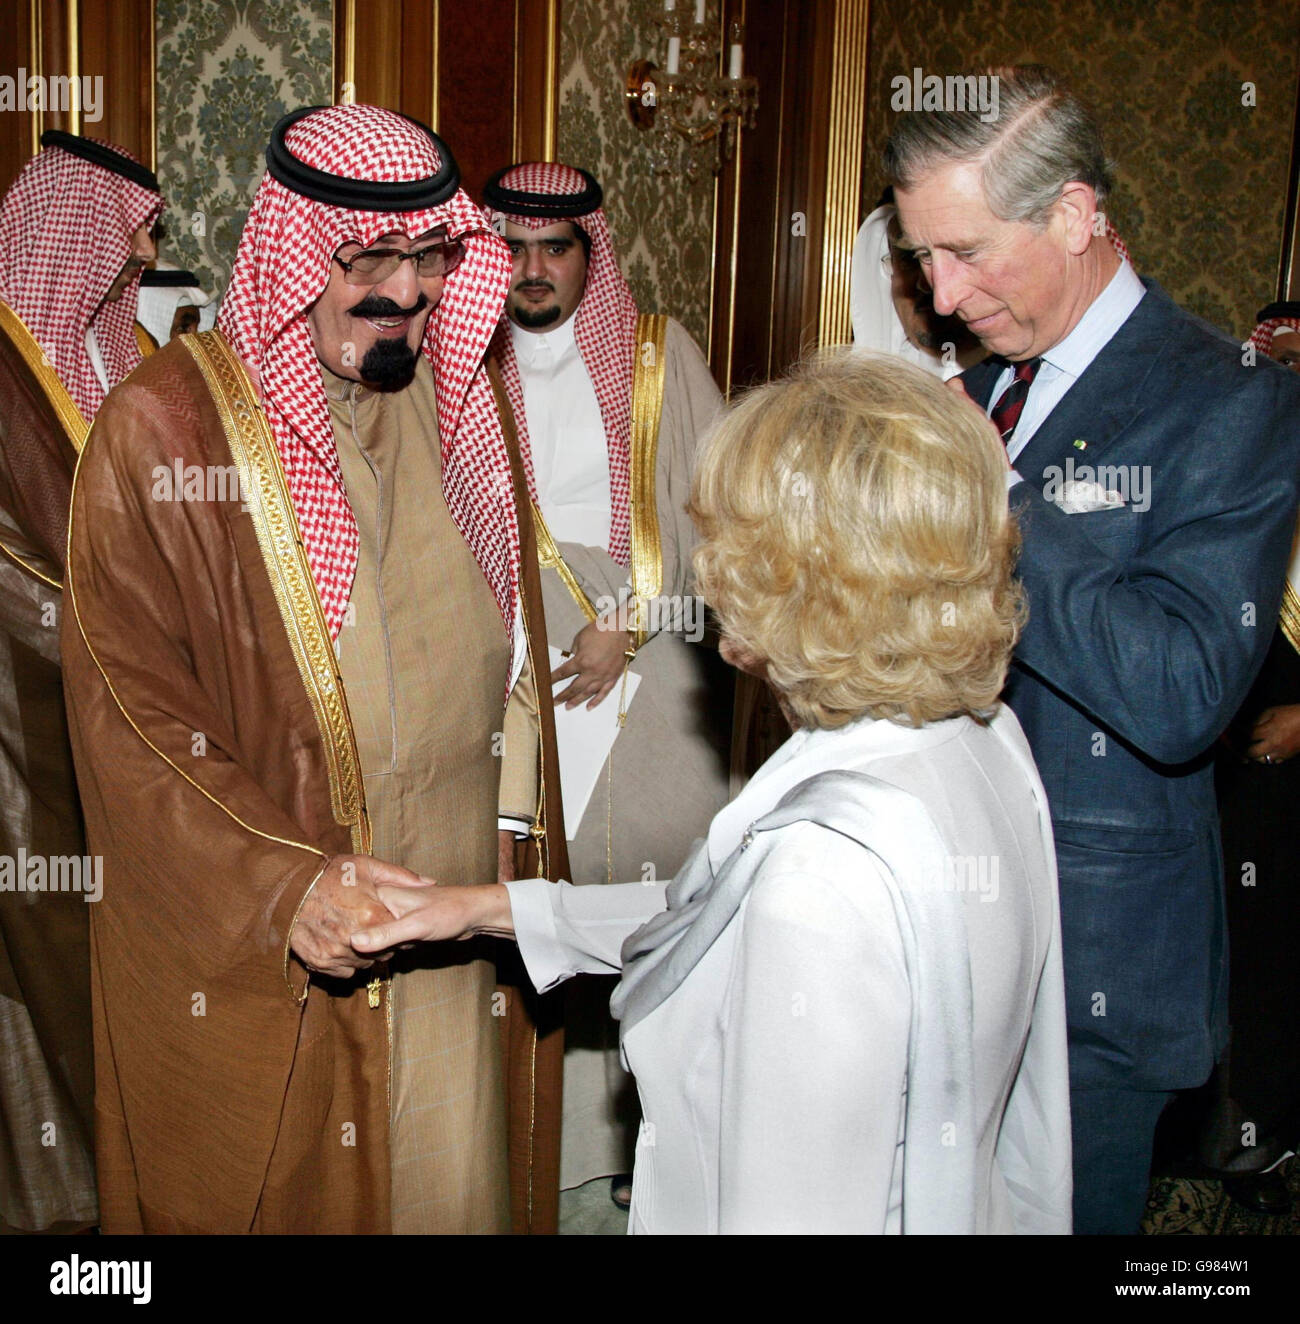 The Duchess of Cornwall shakes hands with King Abdullah Bin Abdulaziz, while the Prince of Wales looks on, Riyadh, Saudi Arabia, Saturday March 25, 2006. Prince Charles and Camilla are spending two days in Riyadh amid intense security as they continue with their second overseas tour. See PA story ROYAL Charles. PRESS ASSOCIATION photo. Photo credit should read: Ian Jones/Daily Telegraph Pool/PA Stock Photo